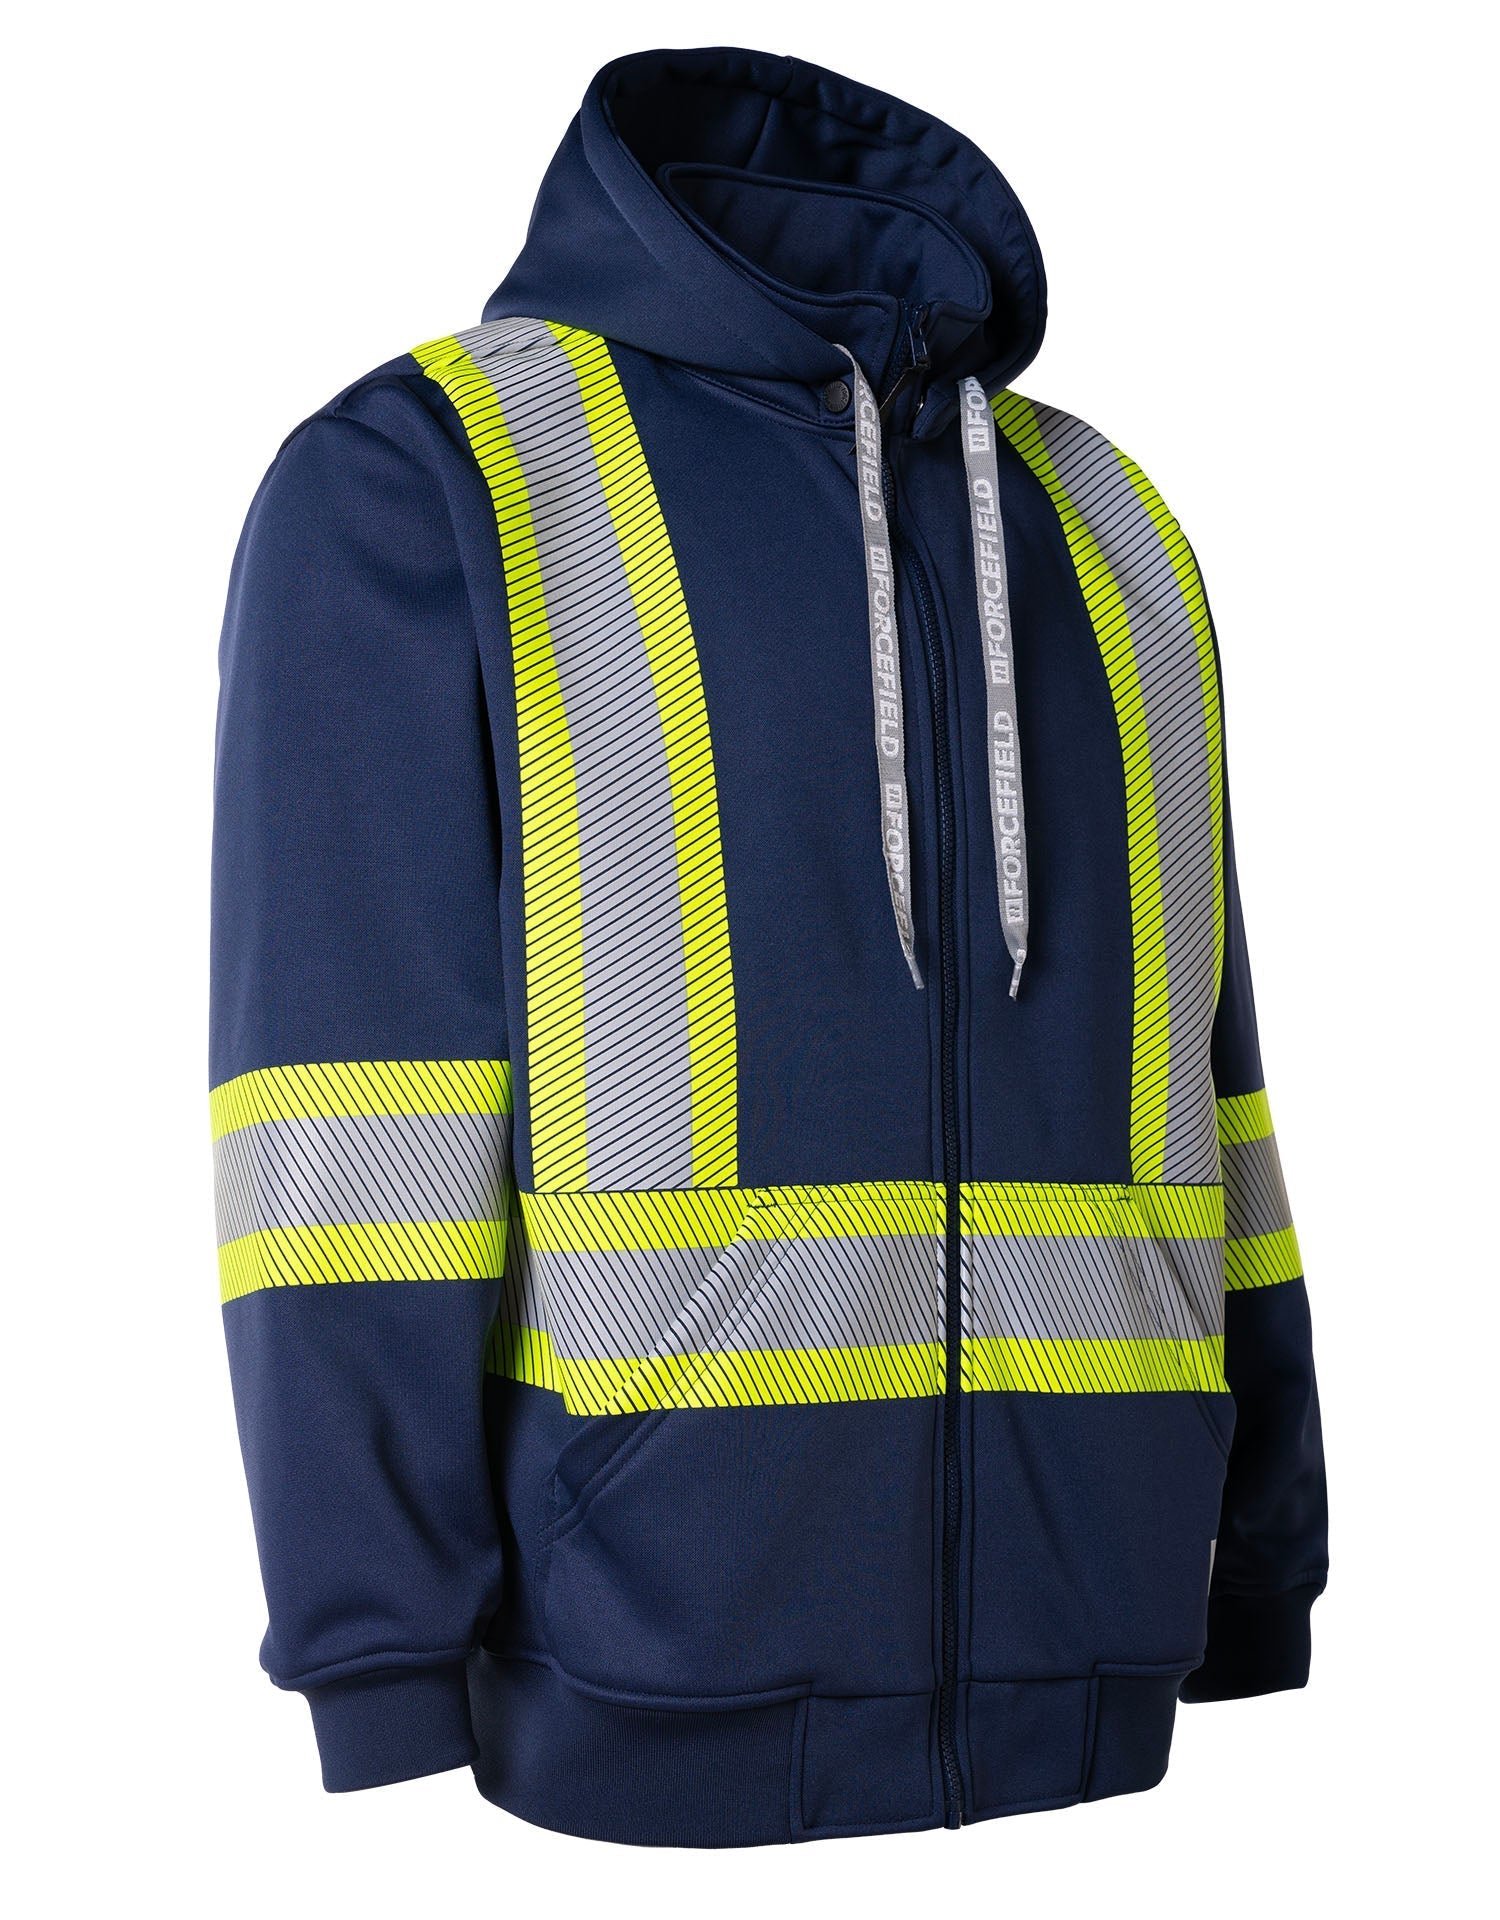 Deluxe Hi Vis Safety Hoodie with Segmented Reflective Tape and Detacha